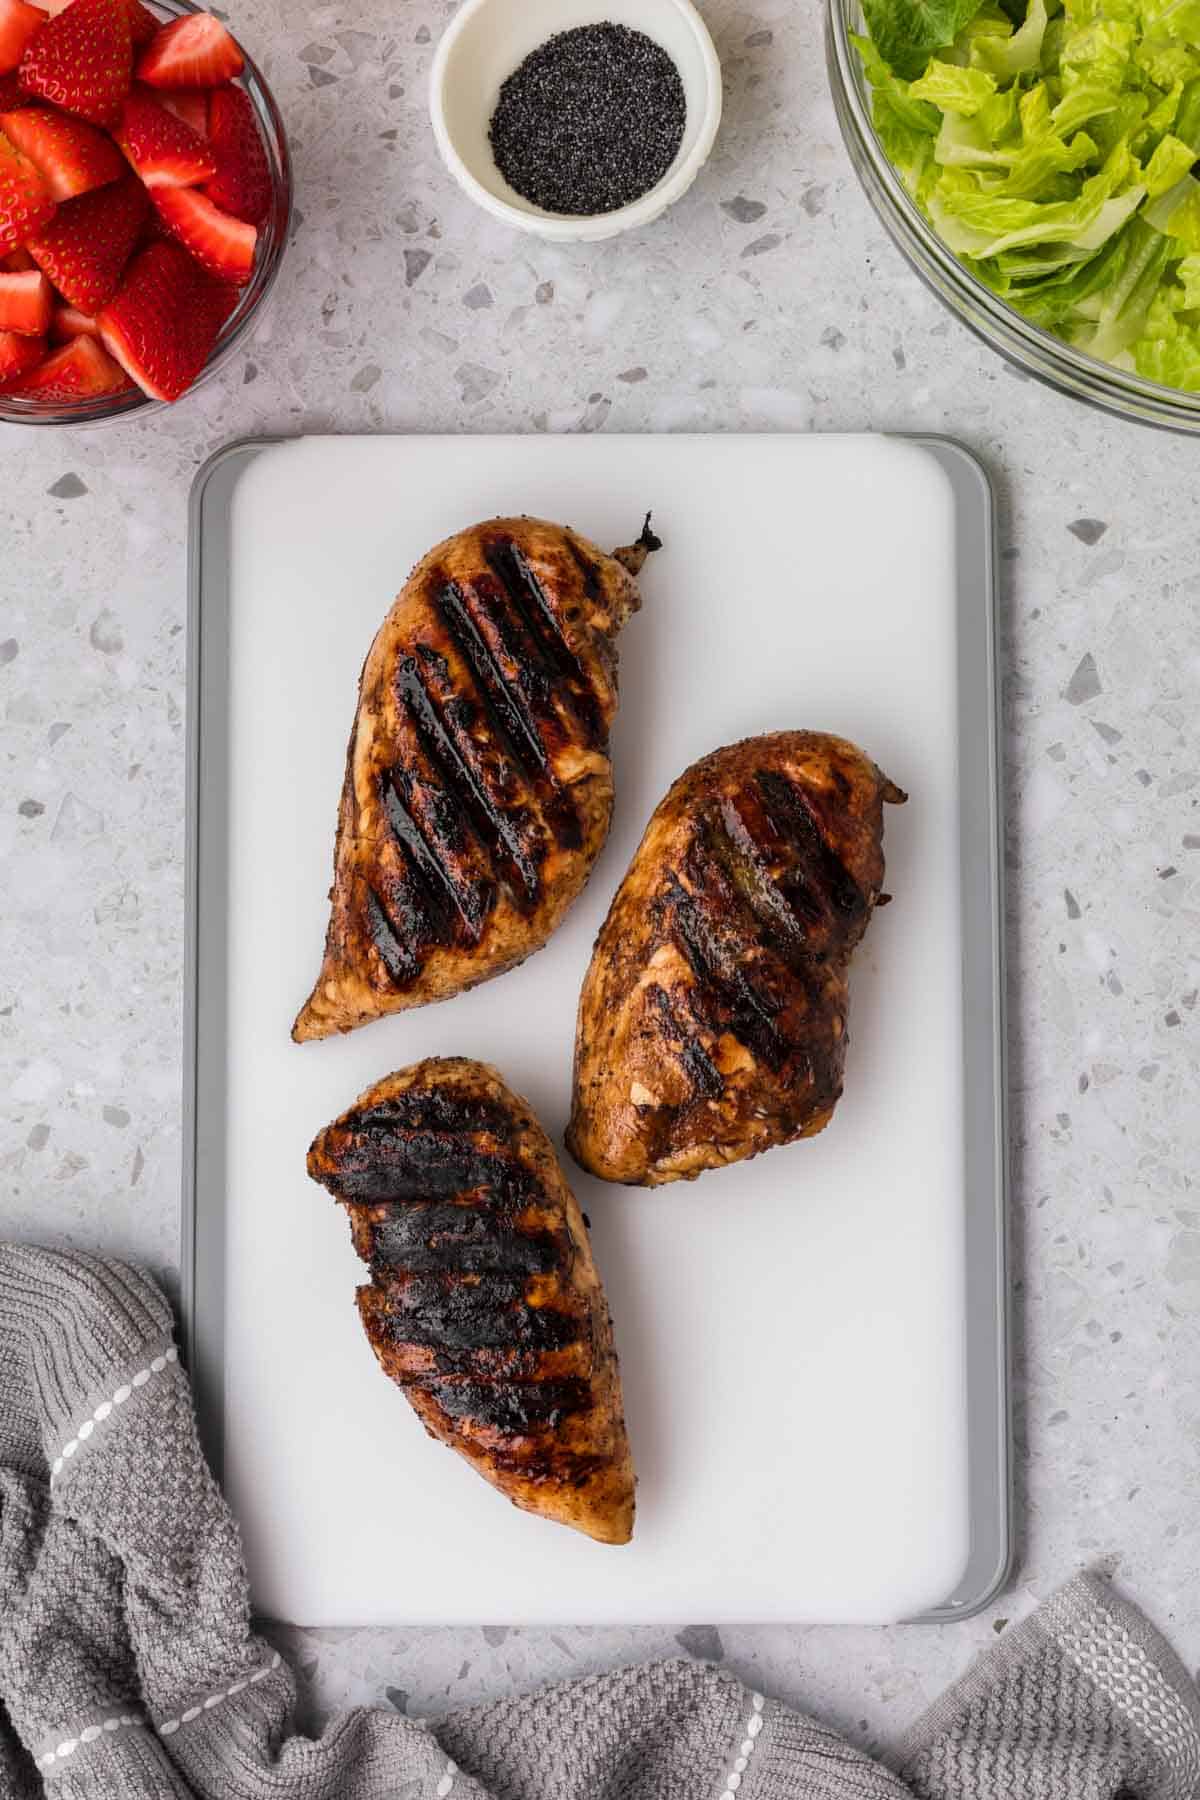 Grilled chicken on cutting board with a bowls of slice strawberries, poppyseed, and chopped romaine lettuce